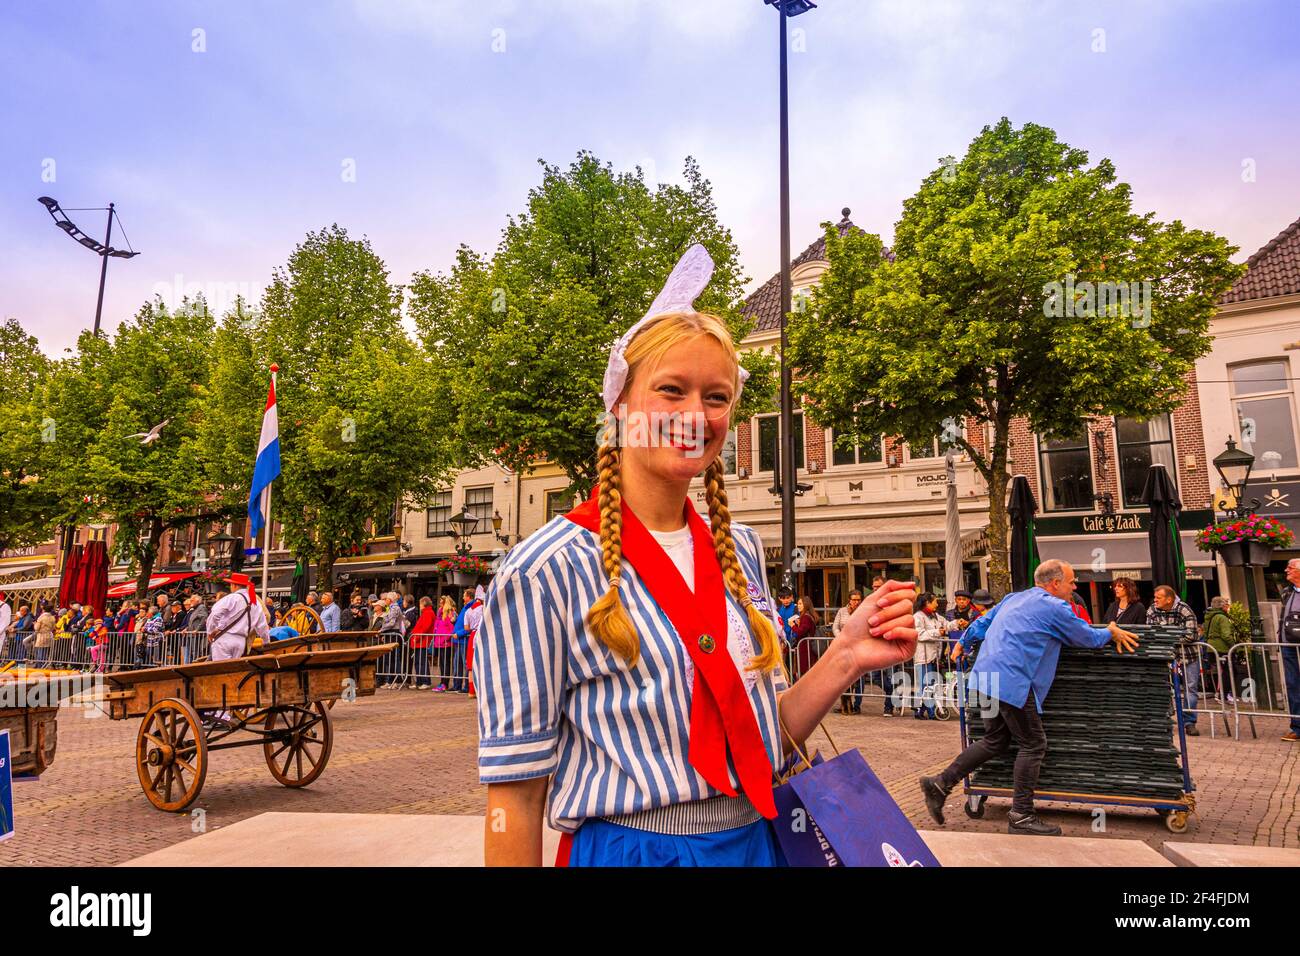 Alkmaar, Netherlands; May 18, 2018: Cheese Market girl with typical dress Stock Photo